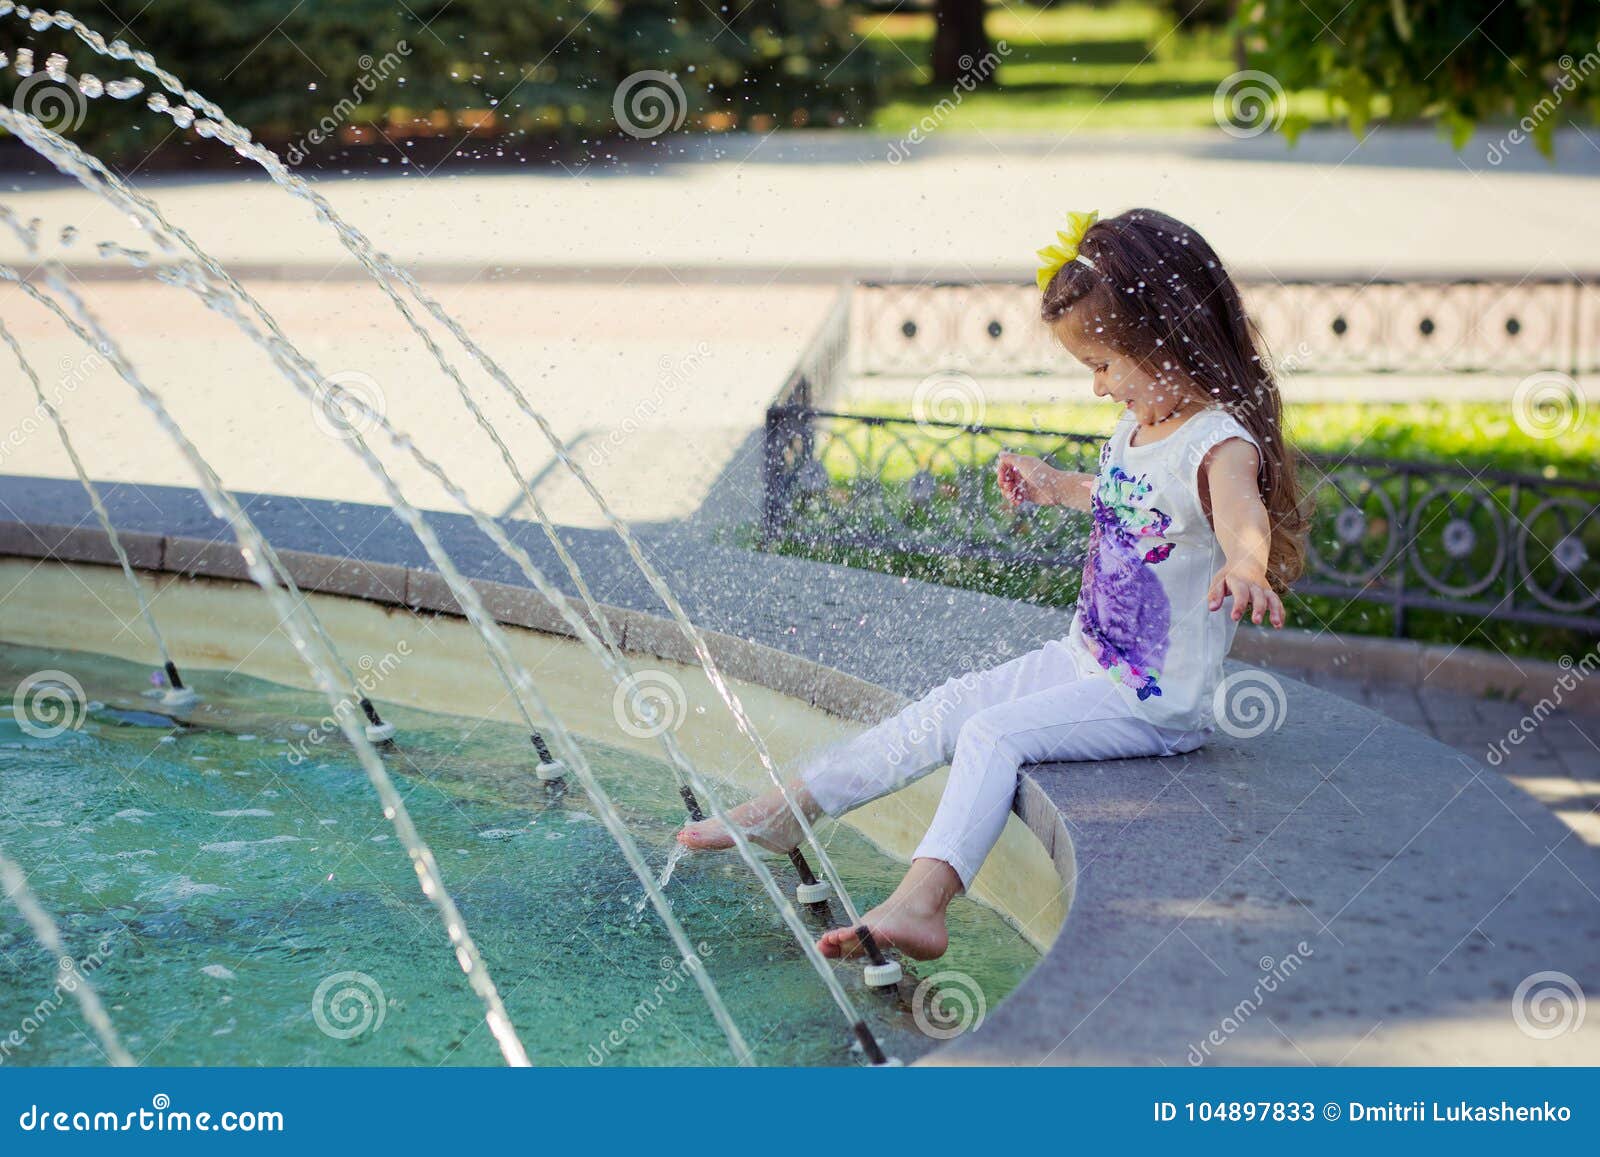 amazing scene of little fashion baby child girl playing summer time with fountain by ner tiny barefoot legs wearing fancy clothes